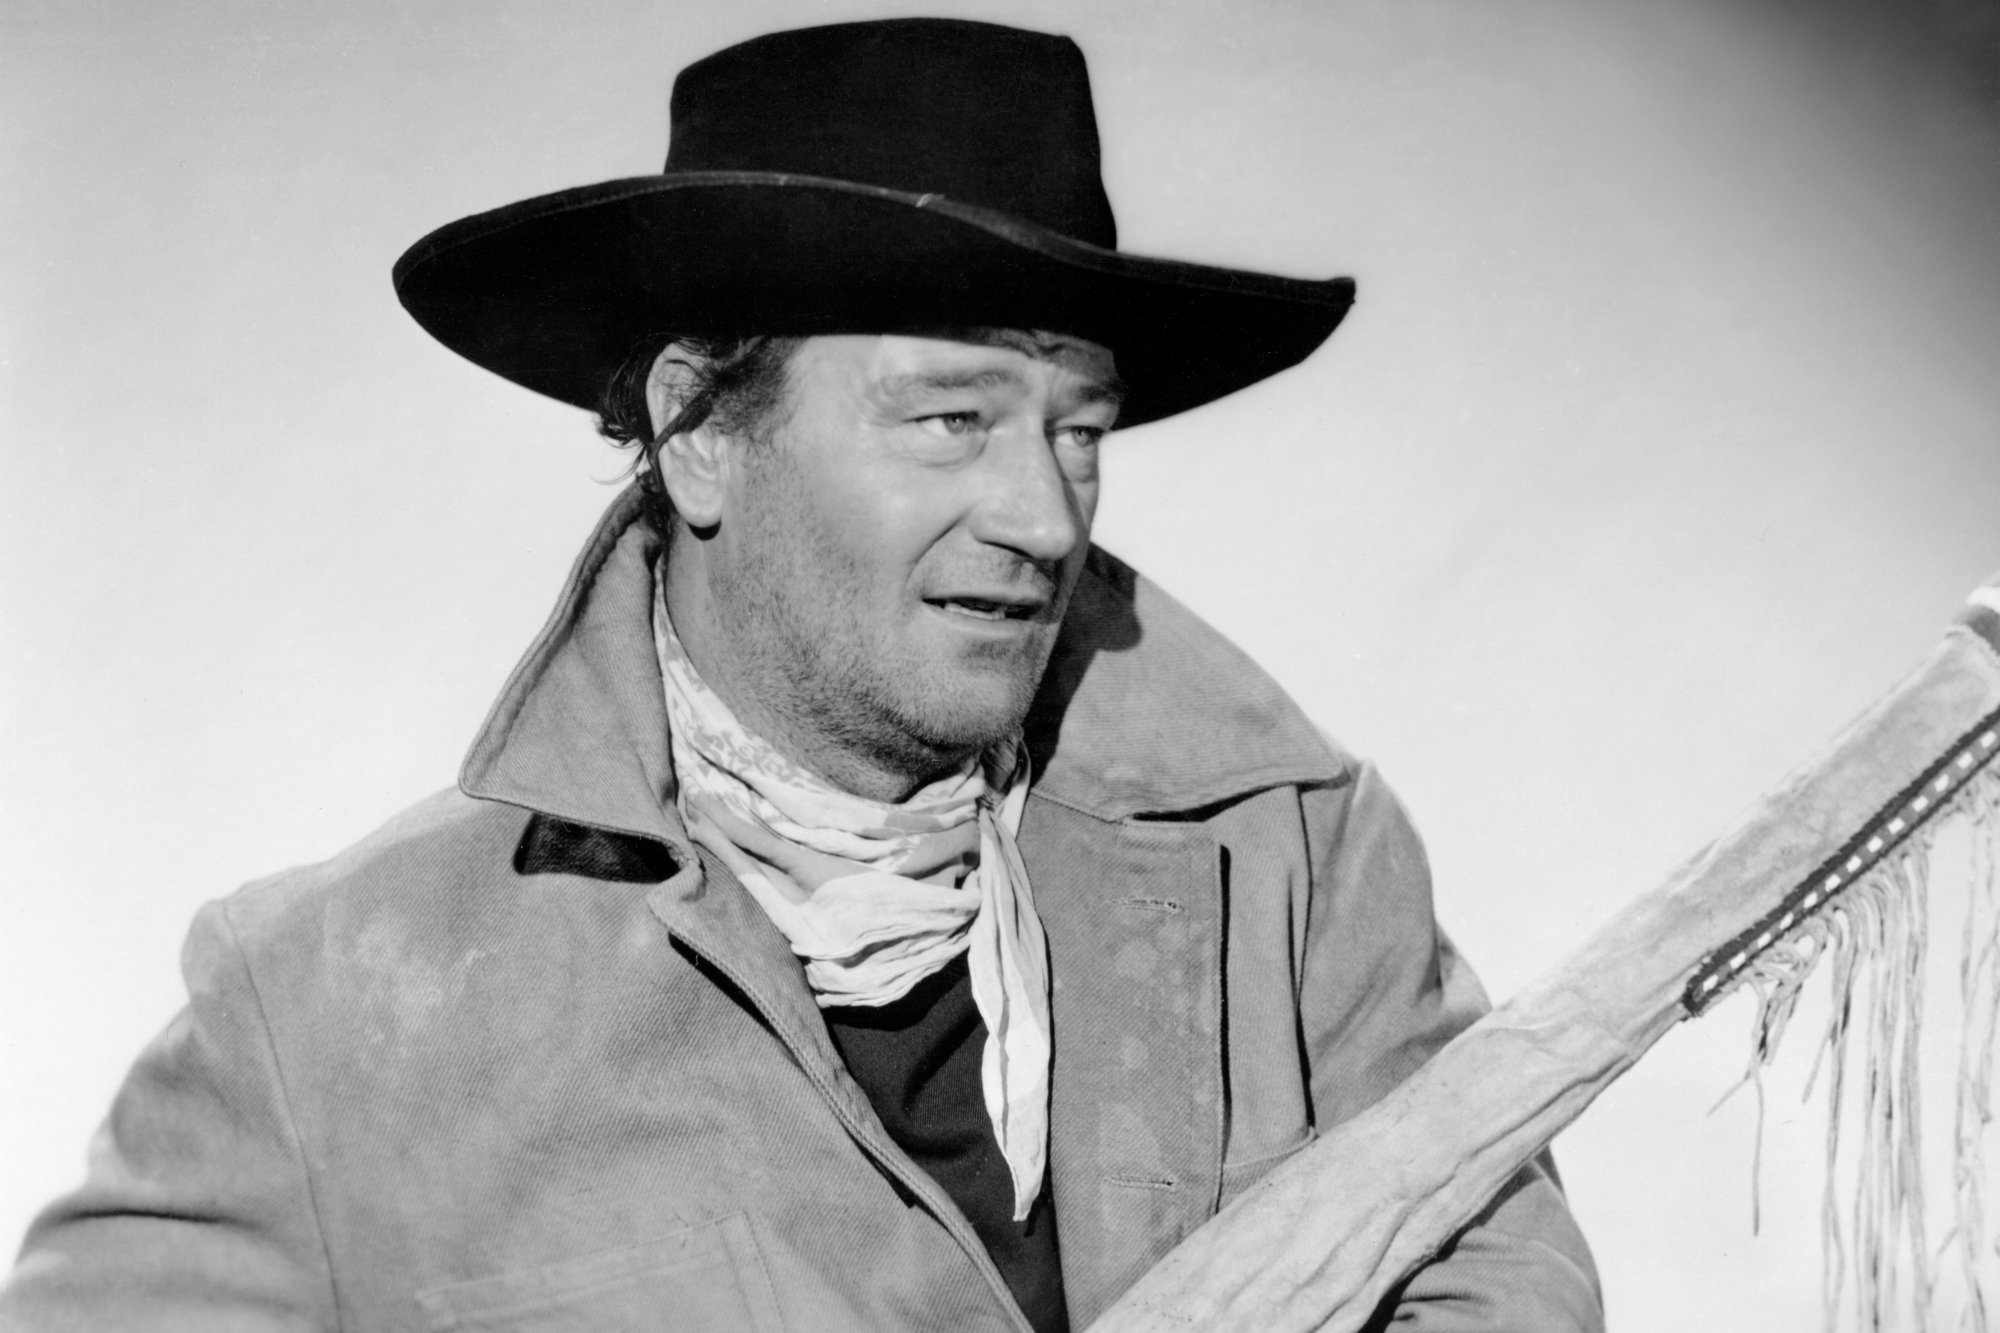 'The Searchers' John Wayne as Ethan Edwards wearing a cowboy outfit and holding a gun